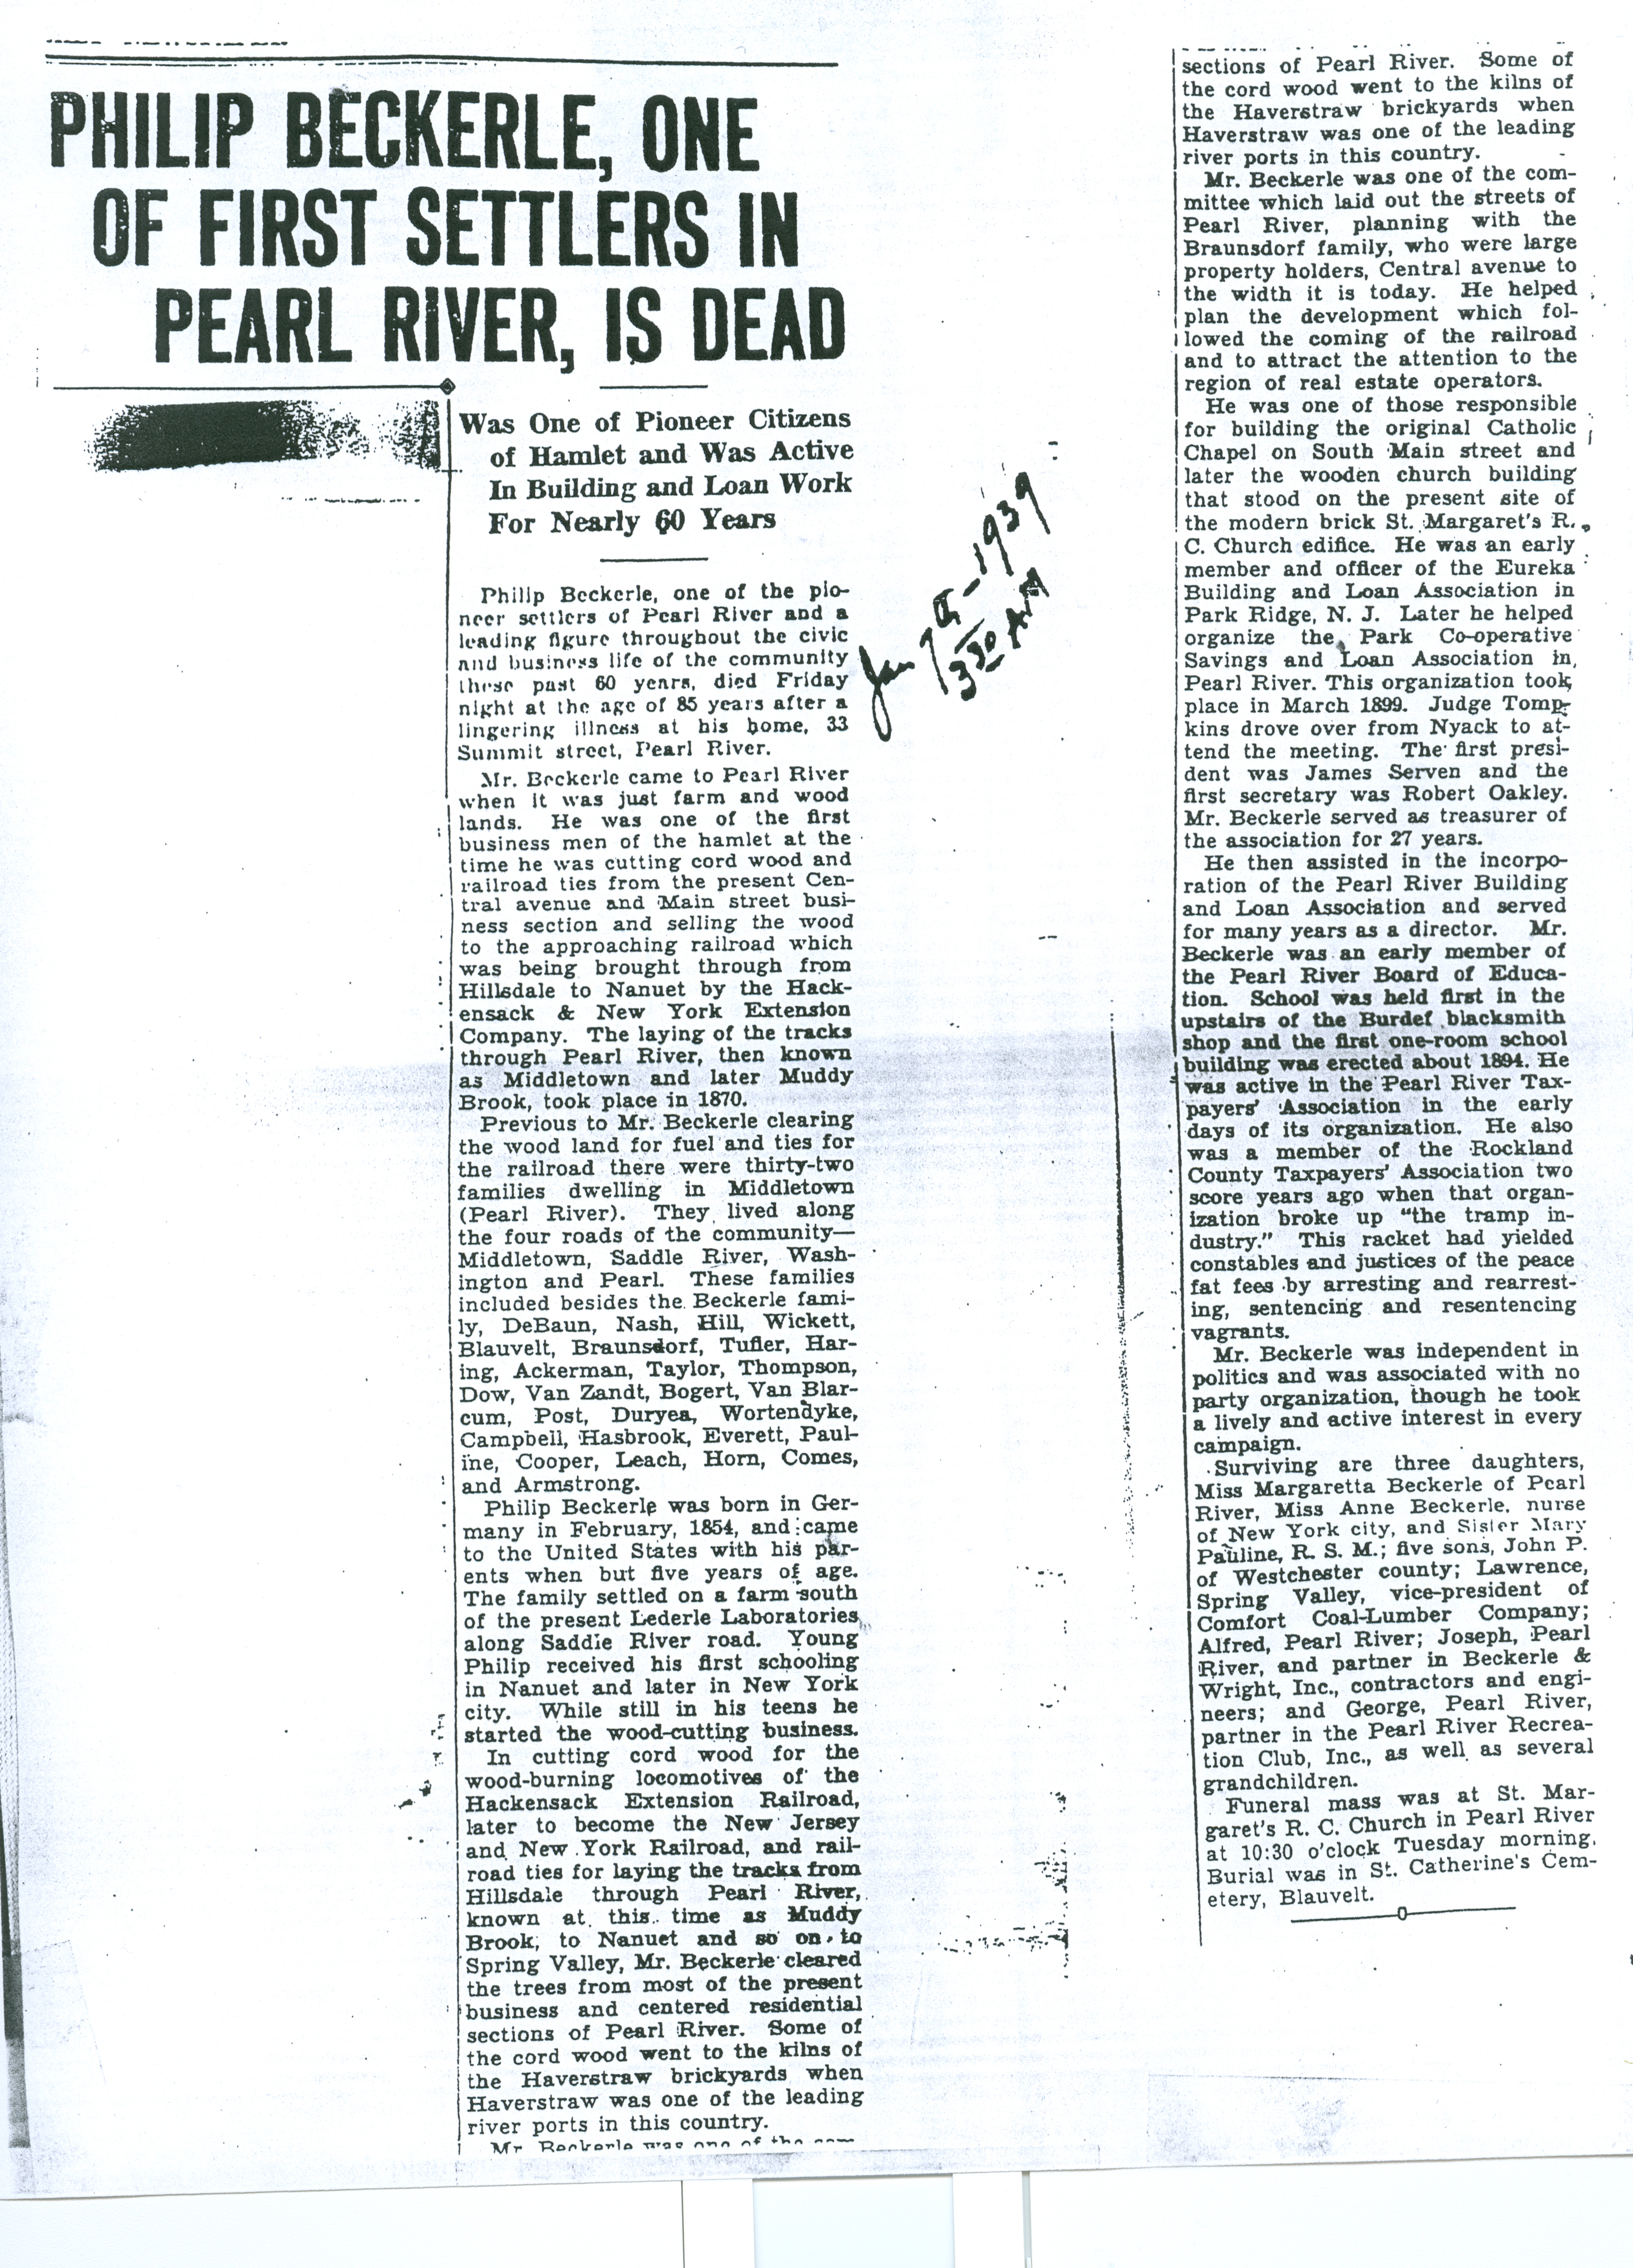 Philip Beckerle one of first settlers in Pearl River is dead: 7 Jan 1939 @3:30am